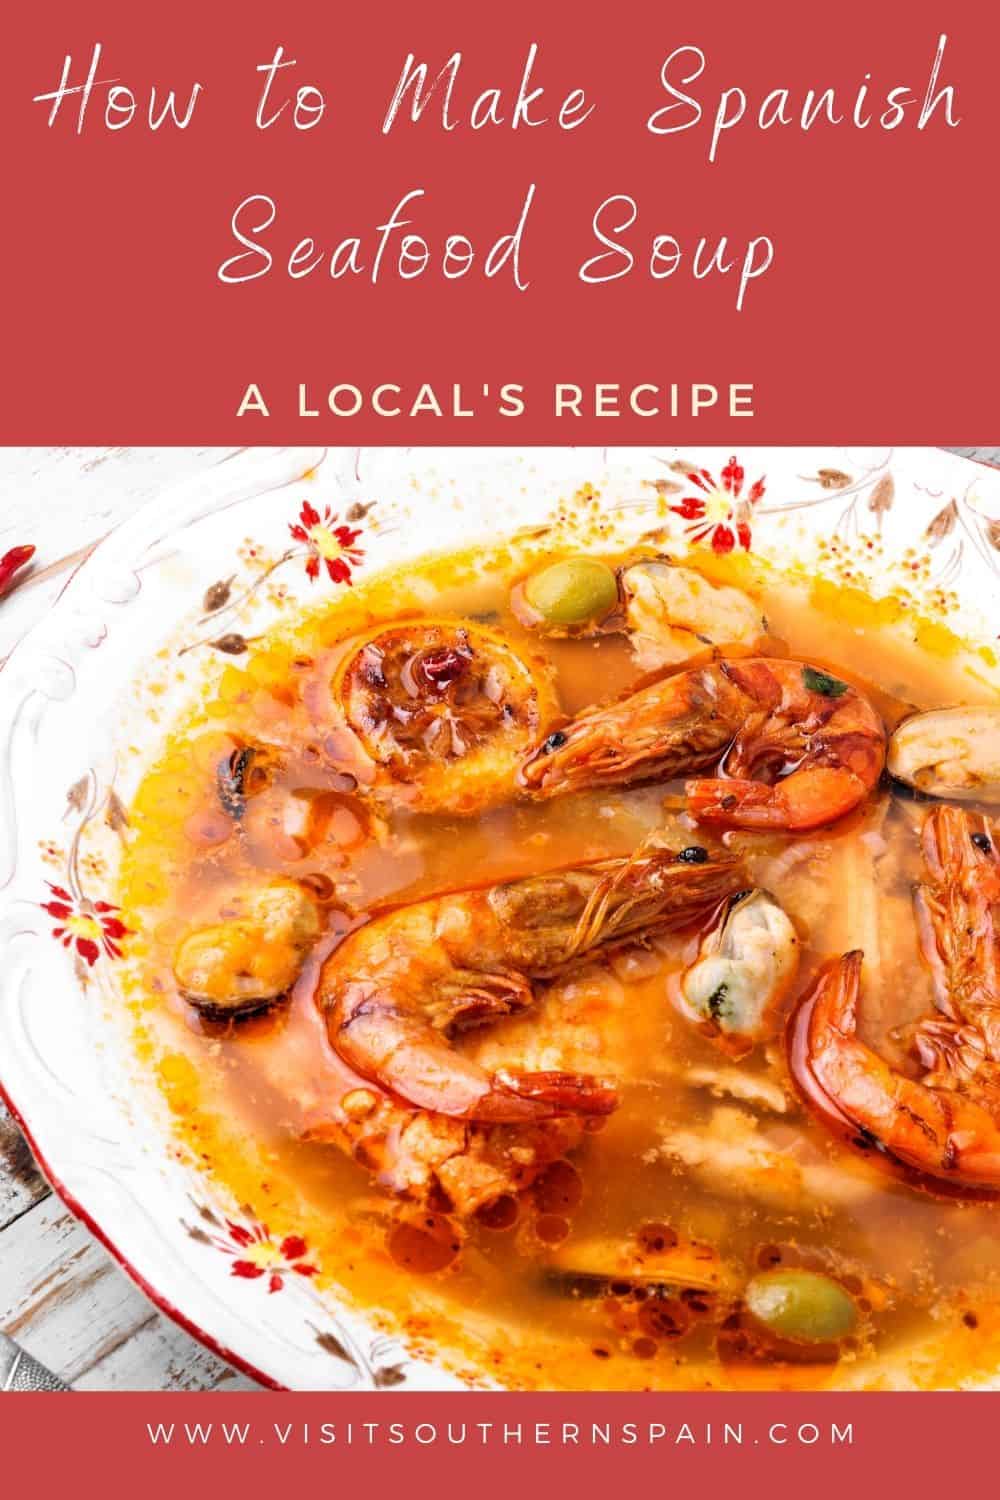 Easy Spanish Seafood Soup Recipe - Visit Southern Spain